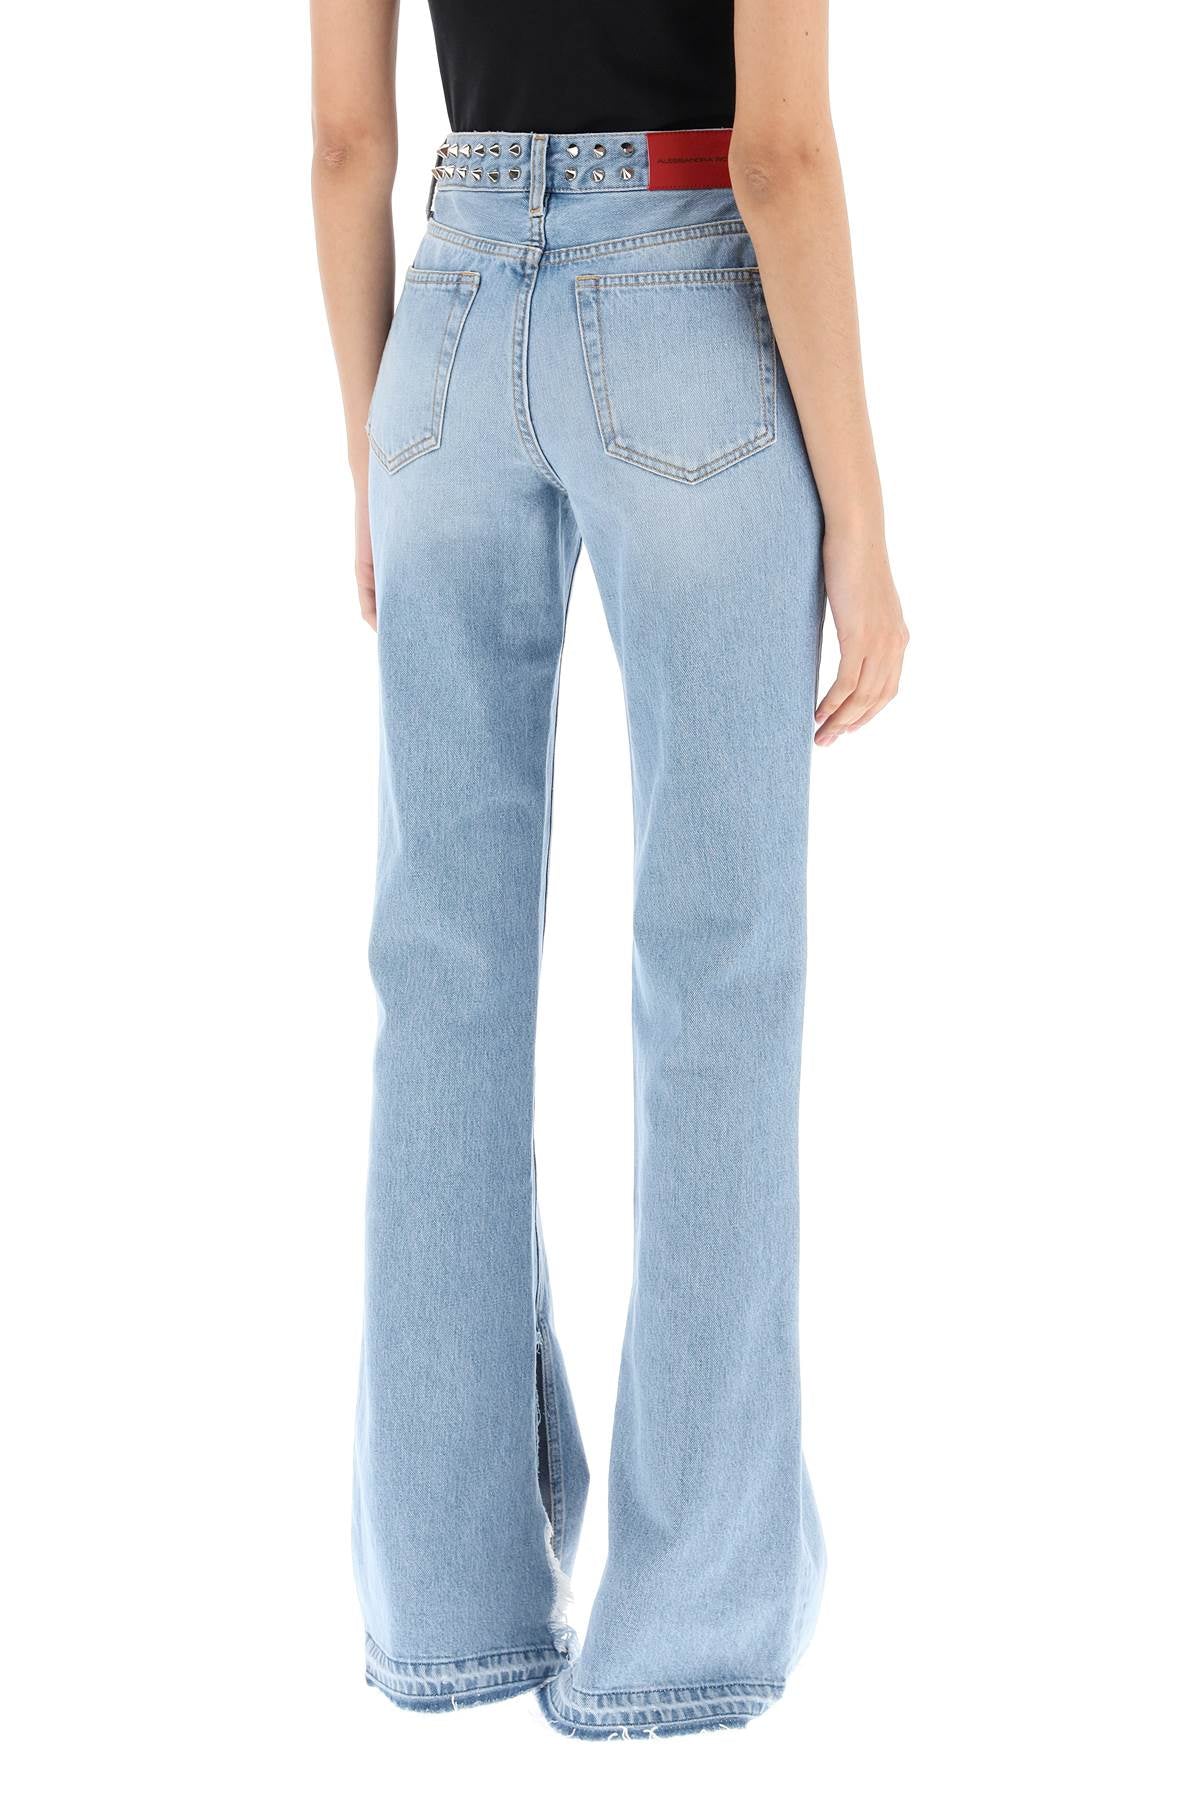 Alessandra Rich Flared Jeans With Studs Blue